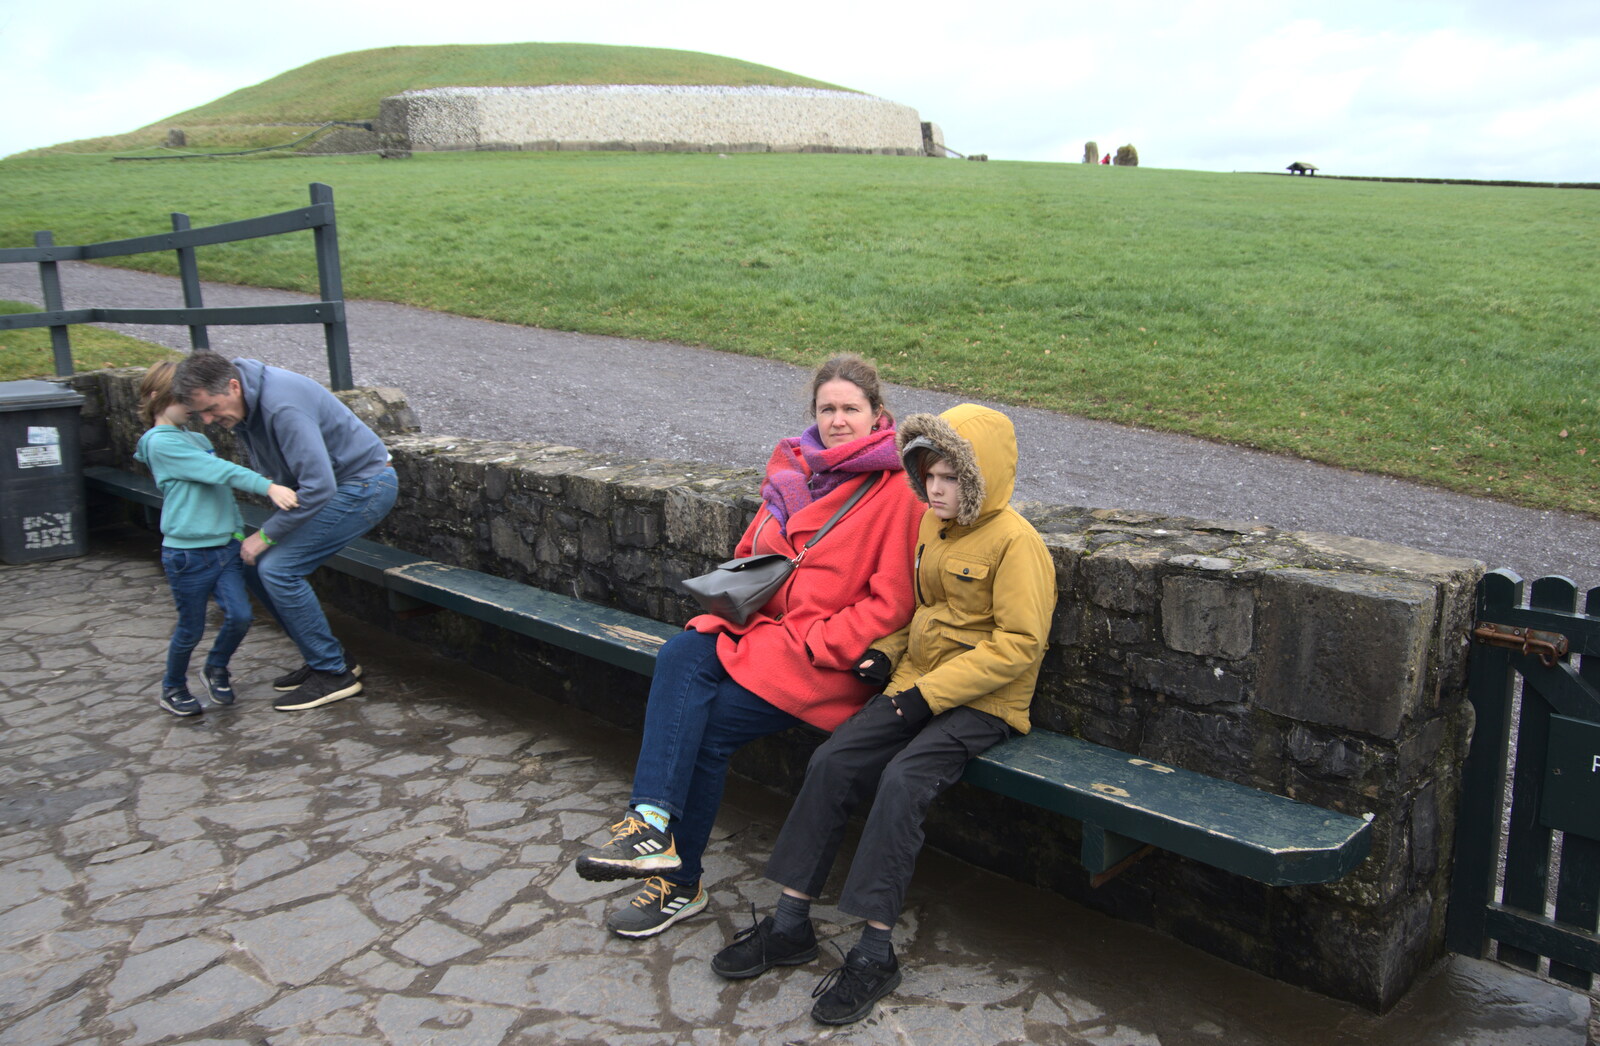 Blackrock North and Newgrange, County Louth, Ireland - 16th February 2023: Isobel and Harry wait for the tour guide